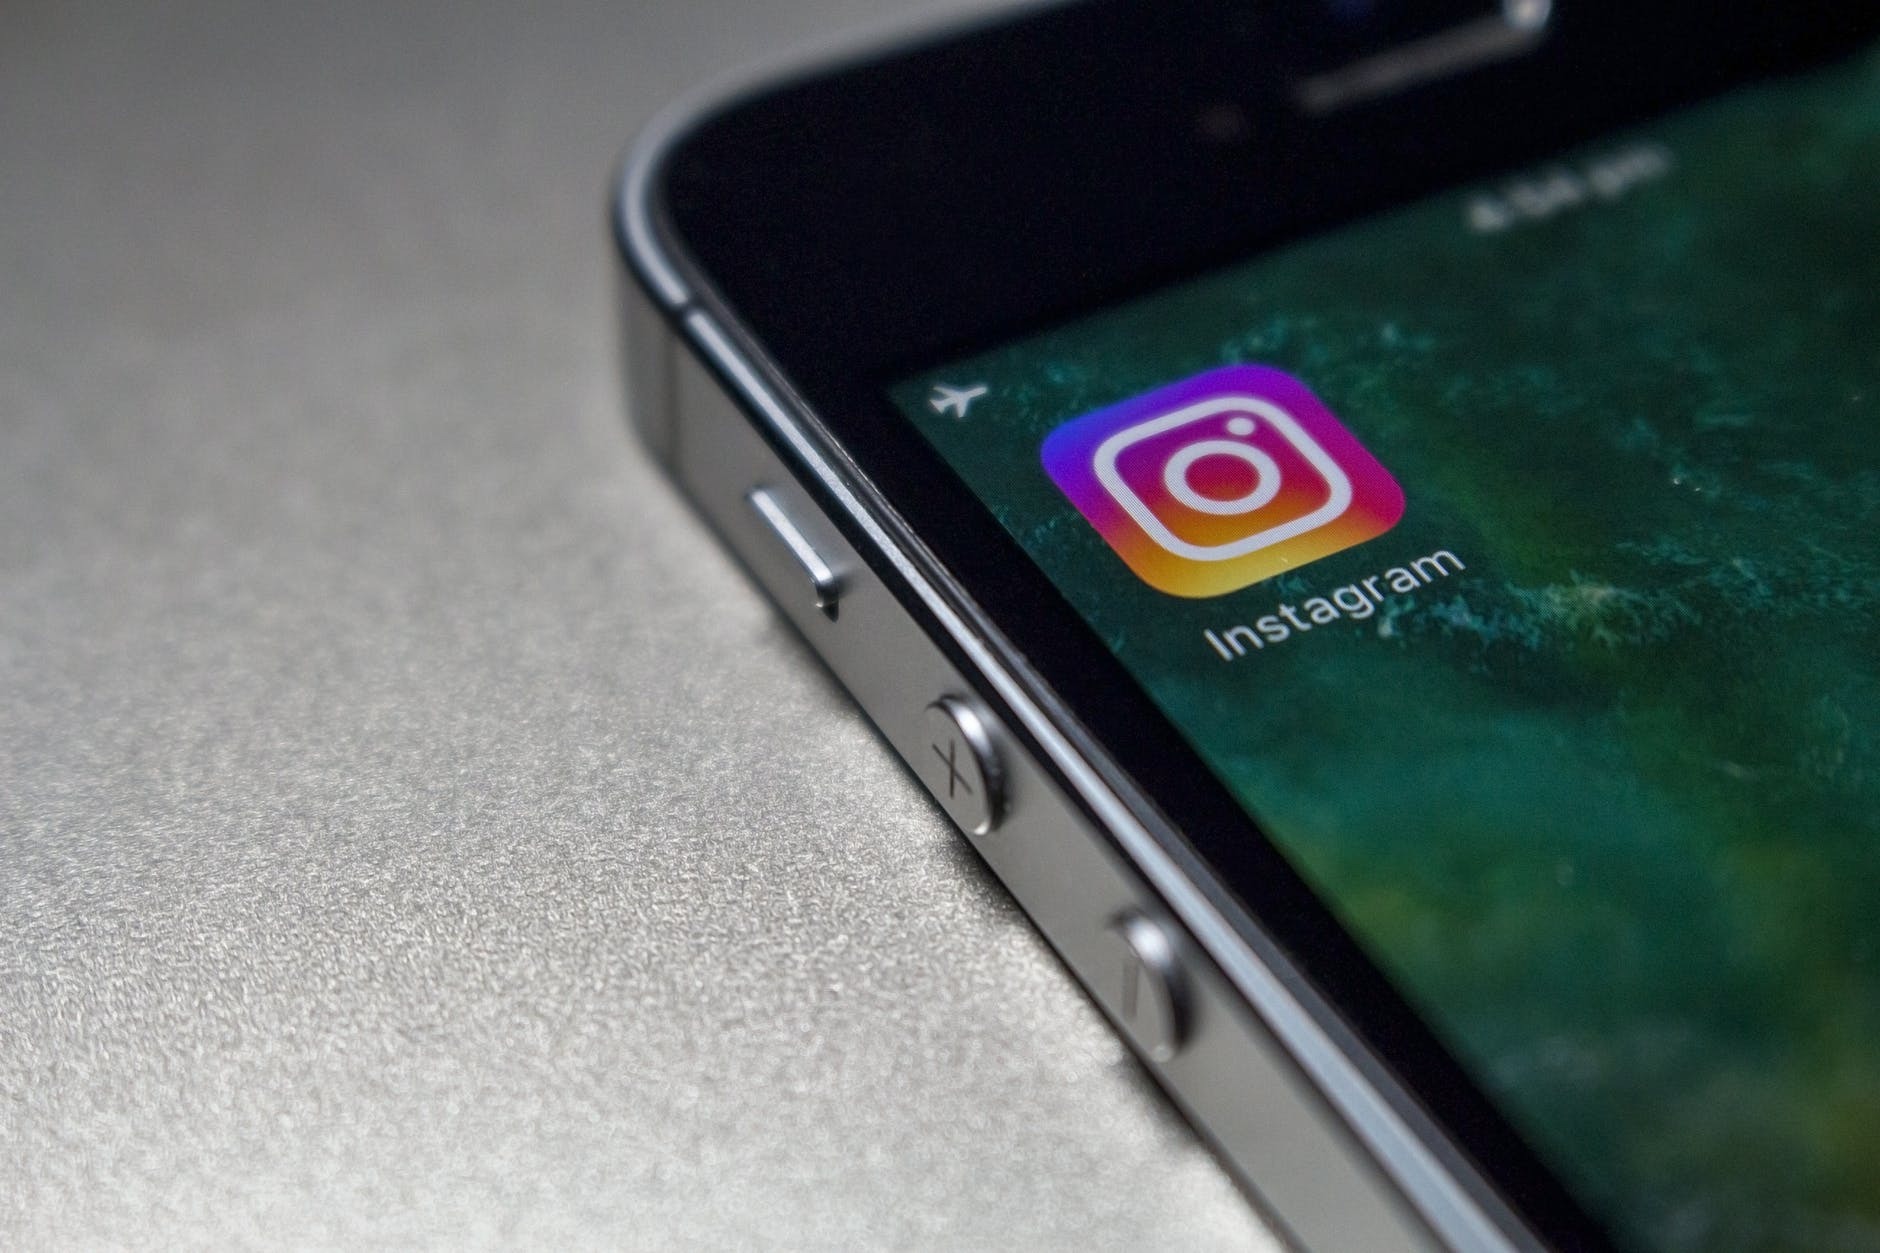 Texas bans Instagram filters after the state of Texas sued Meta, Instagram's parent company, alleging it uses facial recognition technology that is illegal and infringes upon Texans' privacy rights.